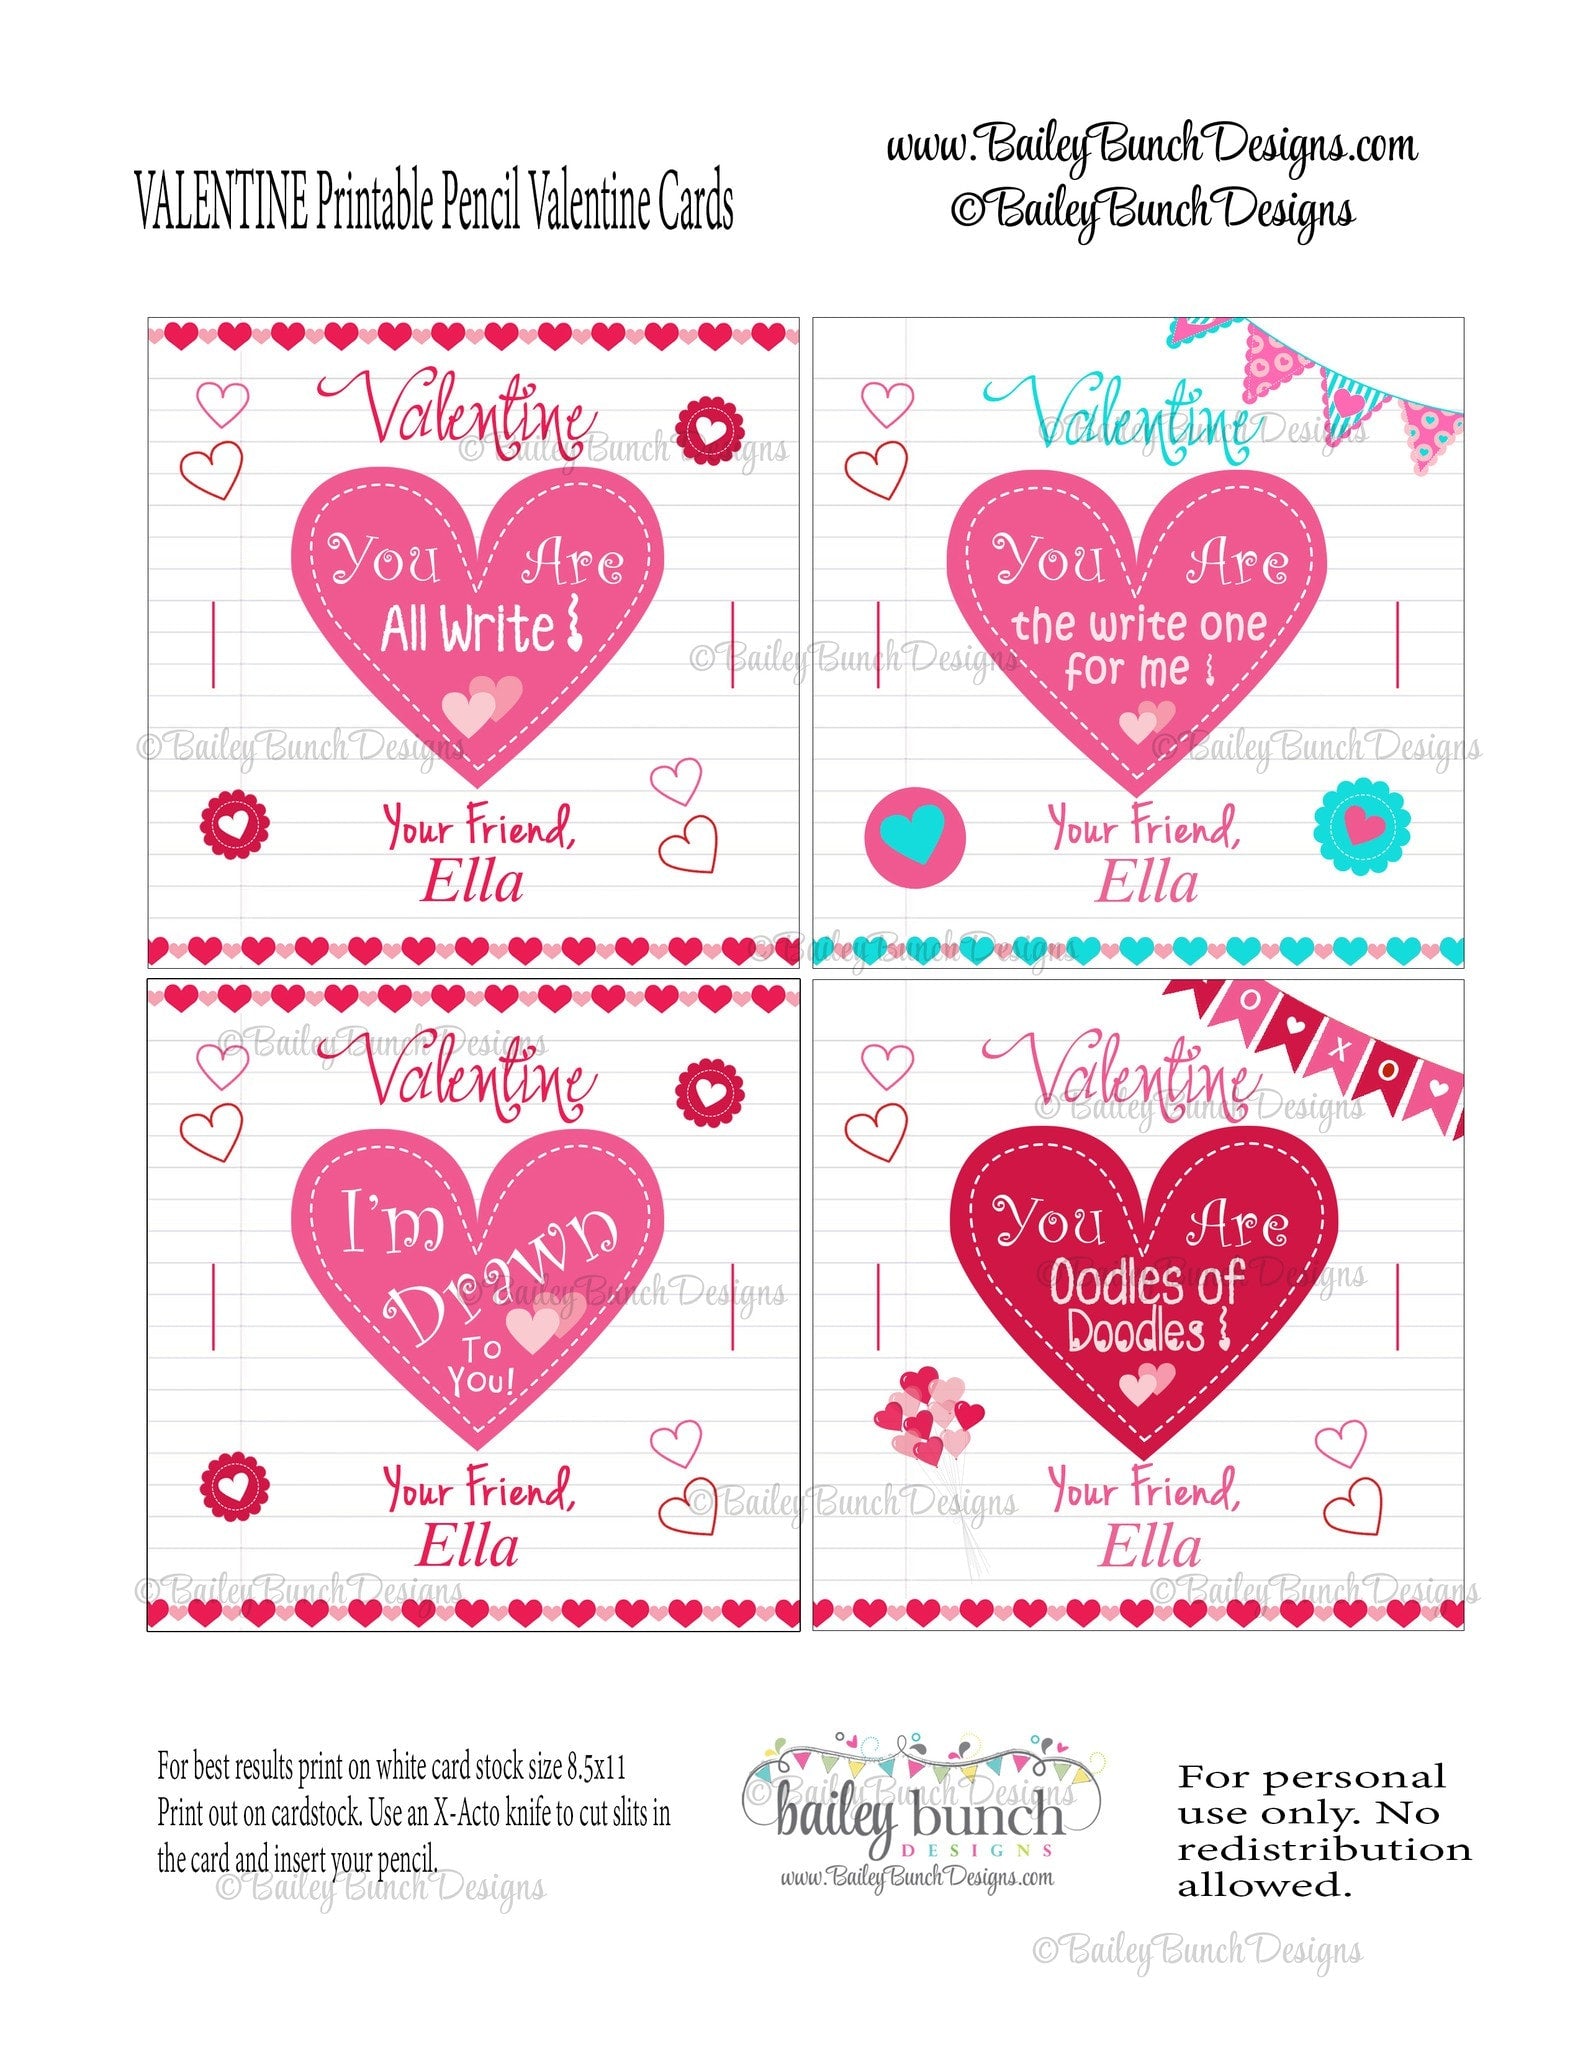 Pencil Valentines, You are All Write Valentines VDAYPENCIL0520